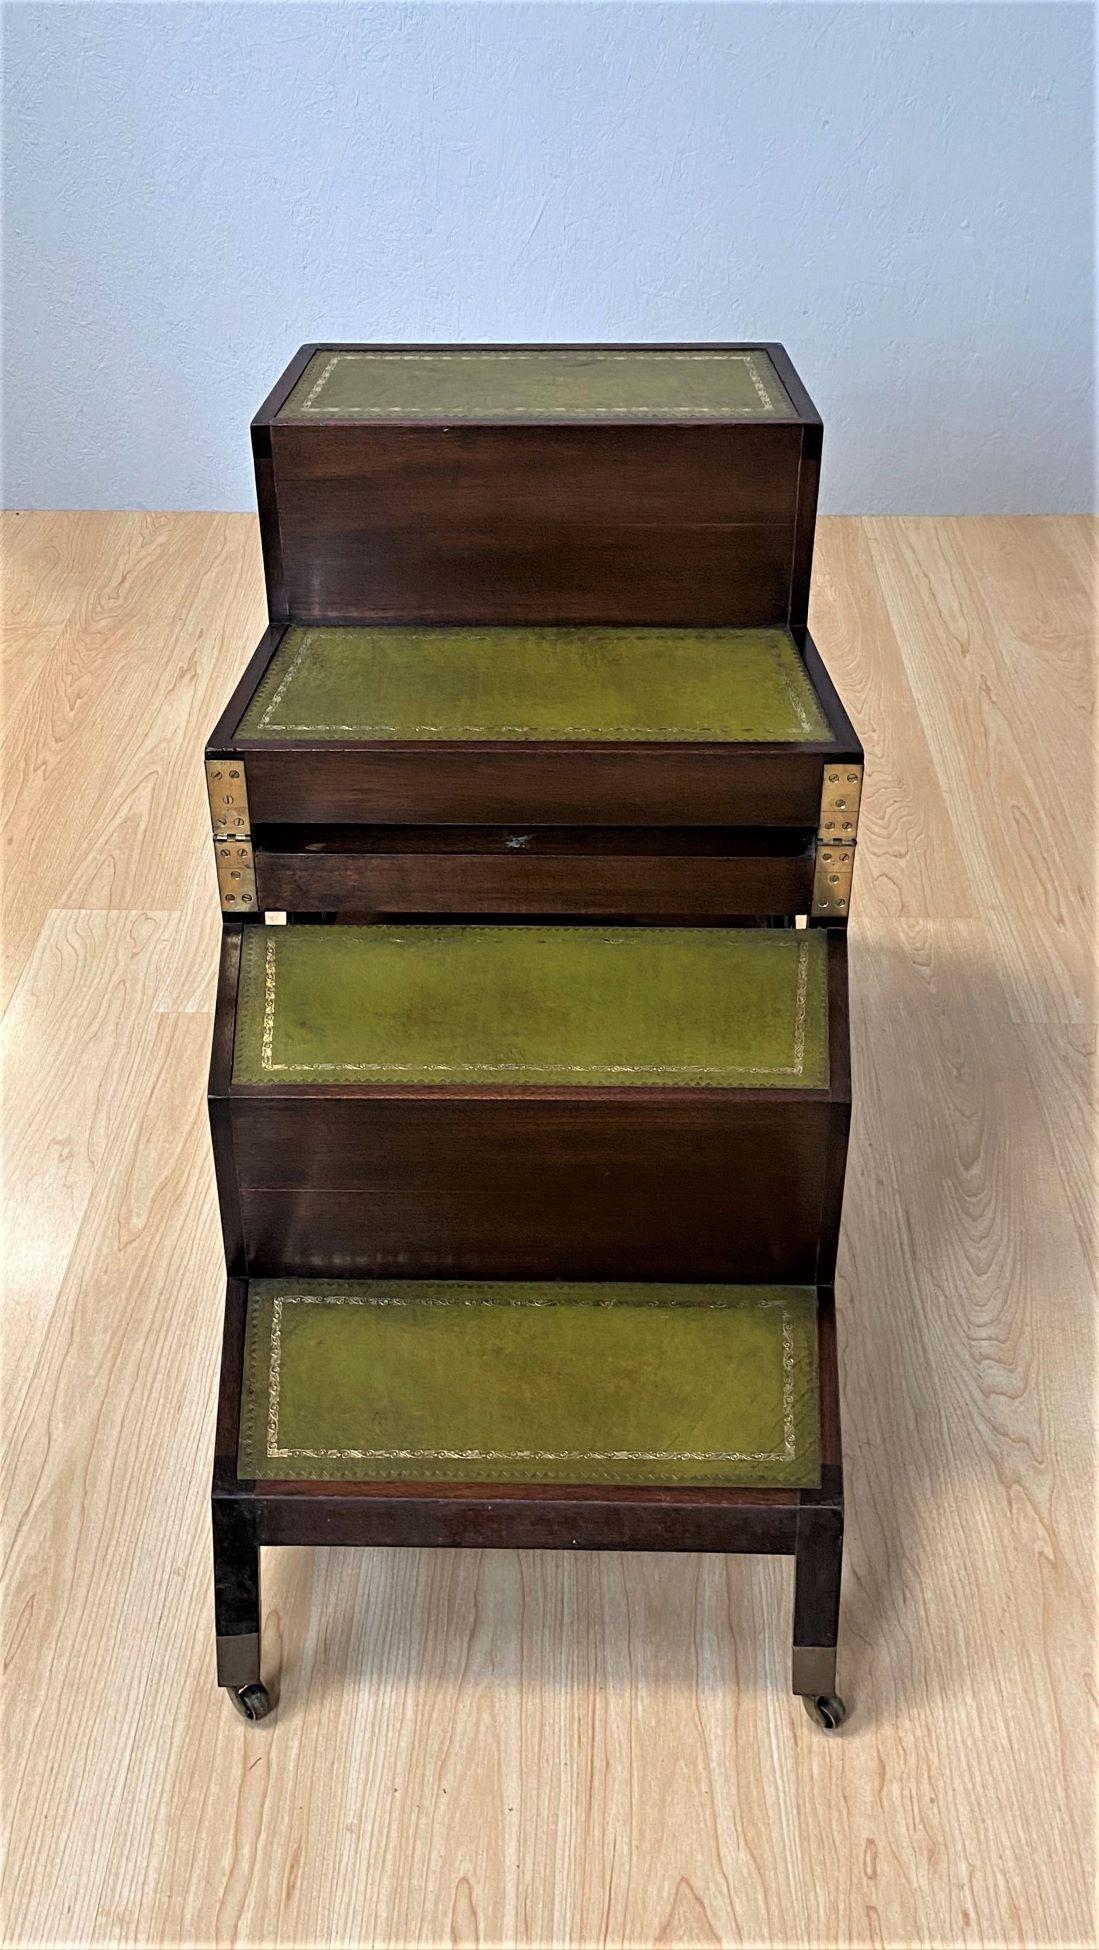 An early 20th century mahogany metamorphic library steps or chair in the Georgian.
The cane work seat with a green leather covered button swab, the whole raised on sabre legs.
This metamorphic chair changes into a solid set of steps with